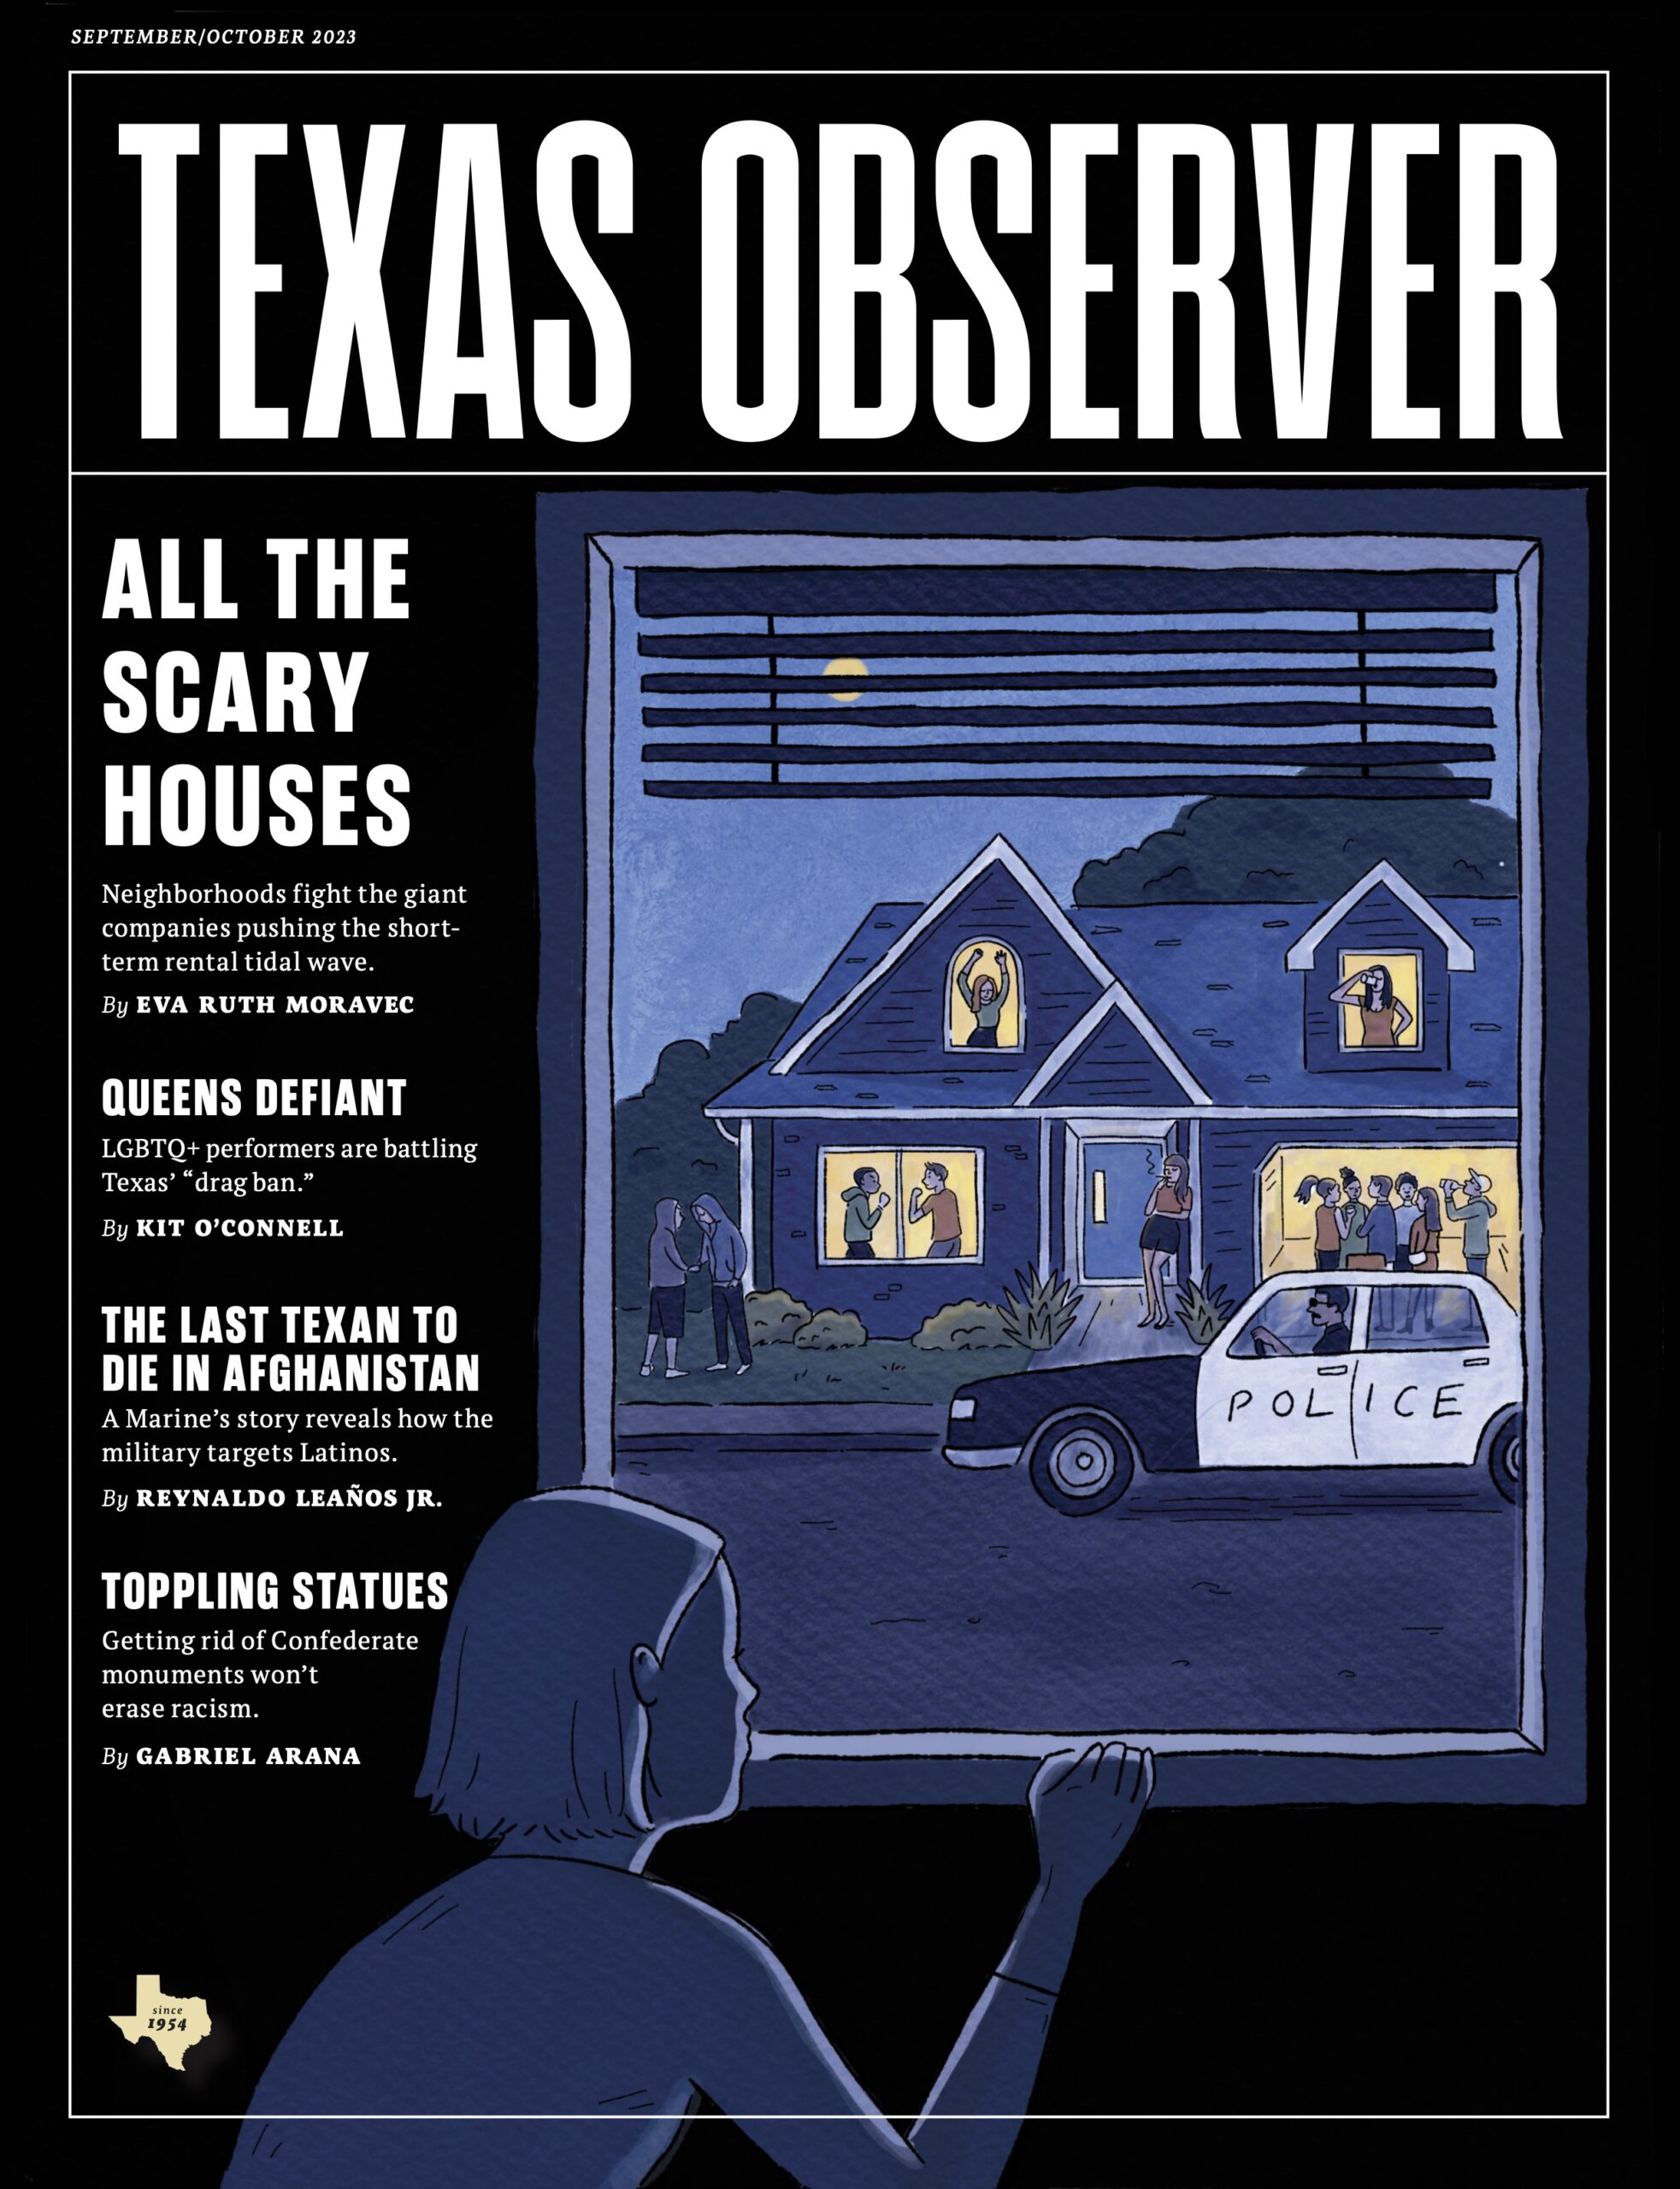 The September/October 2023 issue of the Texas Observer features an illustration of a female-presenting person fearfully peeking over a windowsill at the "party house" across the street, a short-term rental with a raging crowd dancing, fighting, drinking, and dealing with the cops. The top story is "All the Scary Houses: Neighborhoods fight the giant companies pushing the short-term rental tidal wave". Other top stories include "Queens Defiant," "The Last Texan to Die in Afghanistan," and "Toppling Statues."